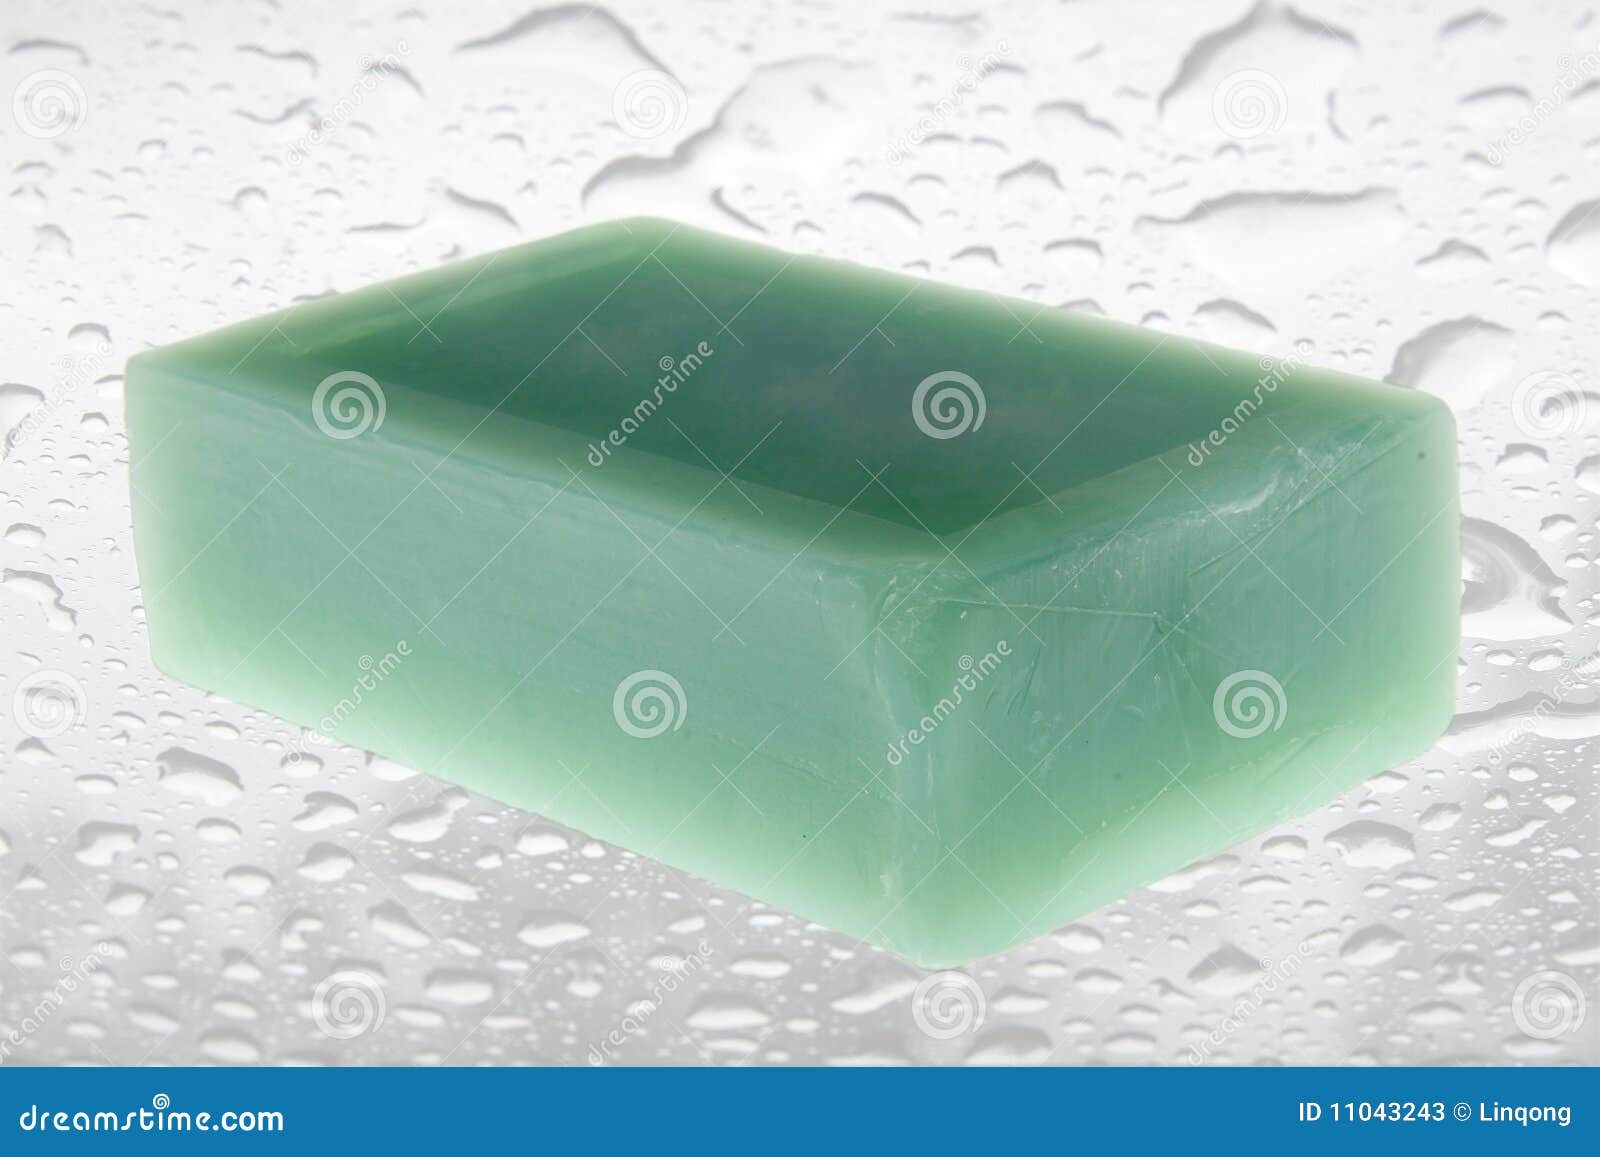 green scented soaps